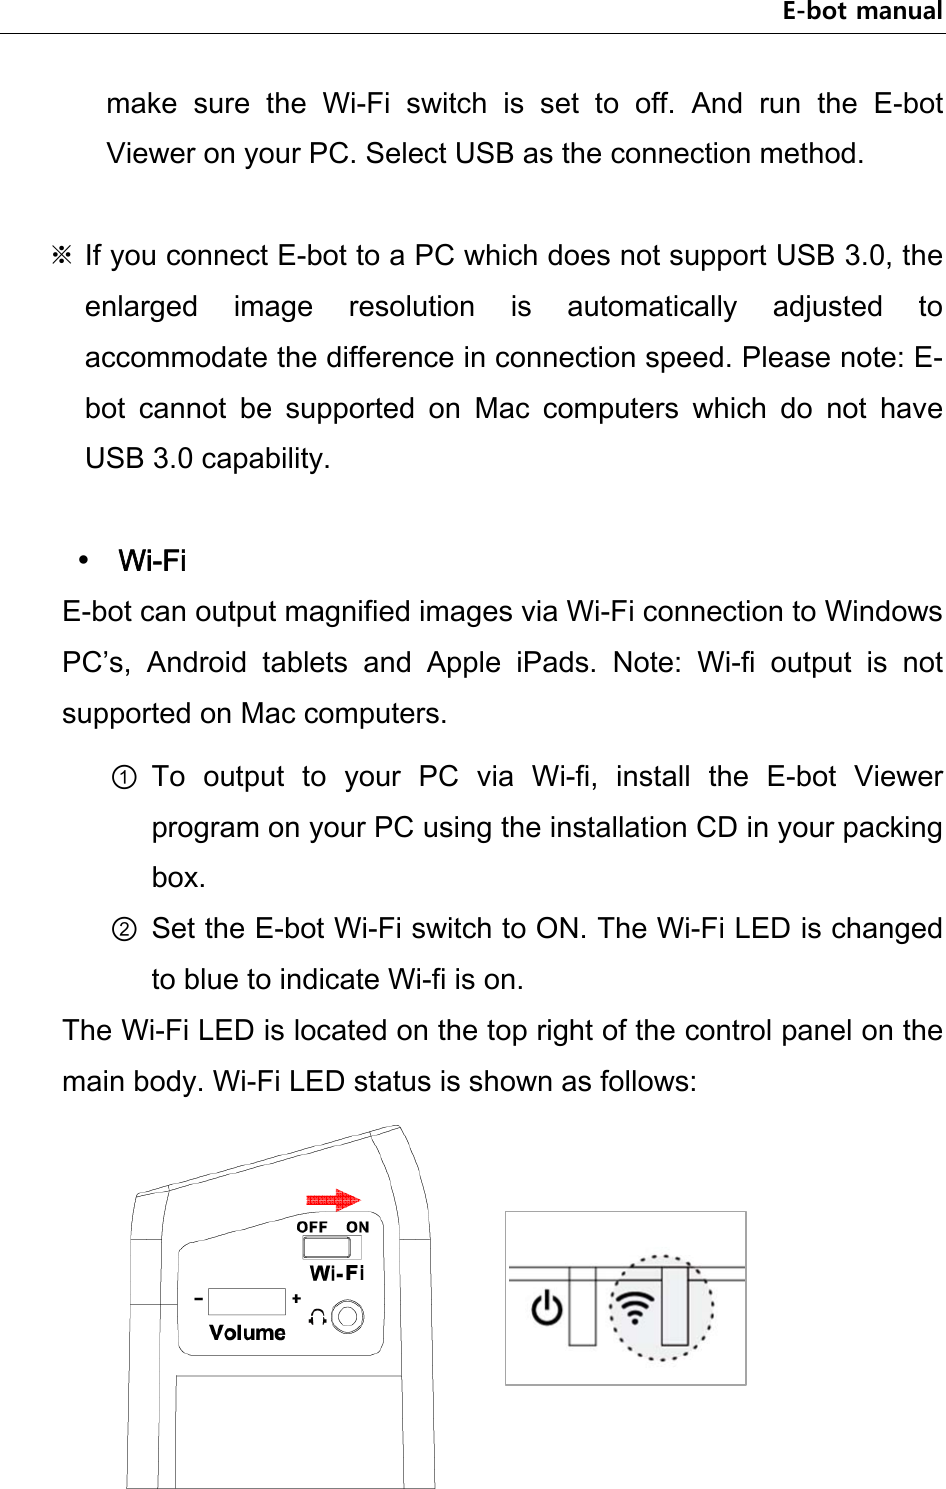 E-bot manual make  sure  the  Wi-Fi  switch  is  set  to  off.  And  run  the  E-bot Viewer on your PC. Select USB as the connection method.  ※ If you connect E-bot to a PC which does not support USB 3.0, the enlarged  image  resolution  is  automatically  adjusted  to accommodate the difference in connection speed. Please note: E-bot  cannot  be  supported  on  Mac  computers  which  do  not  have USB 3.0 capability.   Wi-Fi E-bot can output magnified images via Wi-Fi connection to Windows PC’s,  Android  tablets  and  Apple  iPads.  Note:  Wi-fi  output  is  not supported on Mac computers.   ① To  output  to  your  PC  via  Wi-fi,  install  the  E-bot  Viewer program on your PC using the installation CD in your packing box. ② Set the E-bot Wi-Fi switch to ON. The Wi-Fi LED is changed to blue to indicate Wi-fi is on. The Wi-Fi LED is located on the top right of the control panel on the main body. Wi-Fi LED status is shown as follows:    